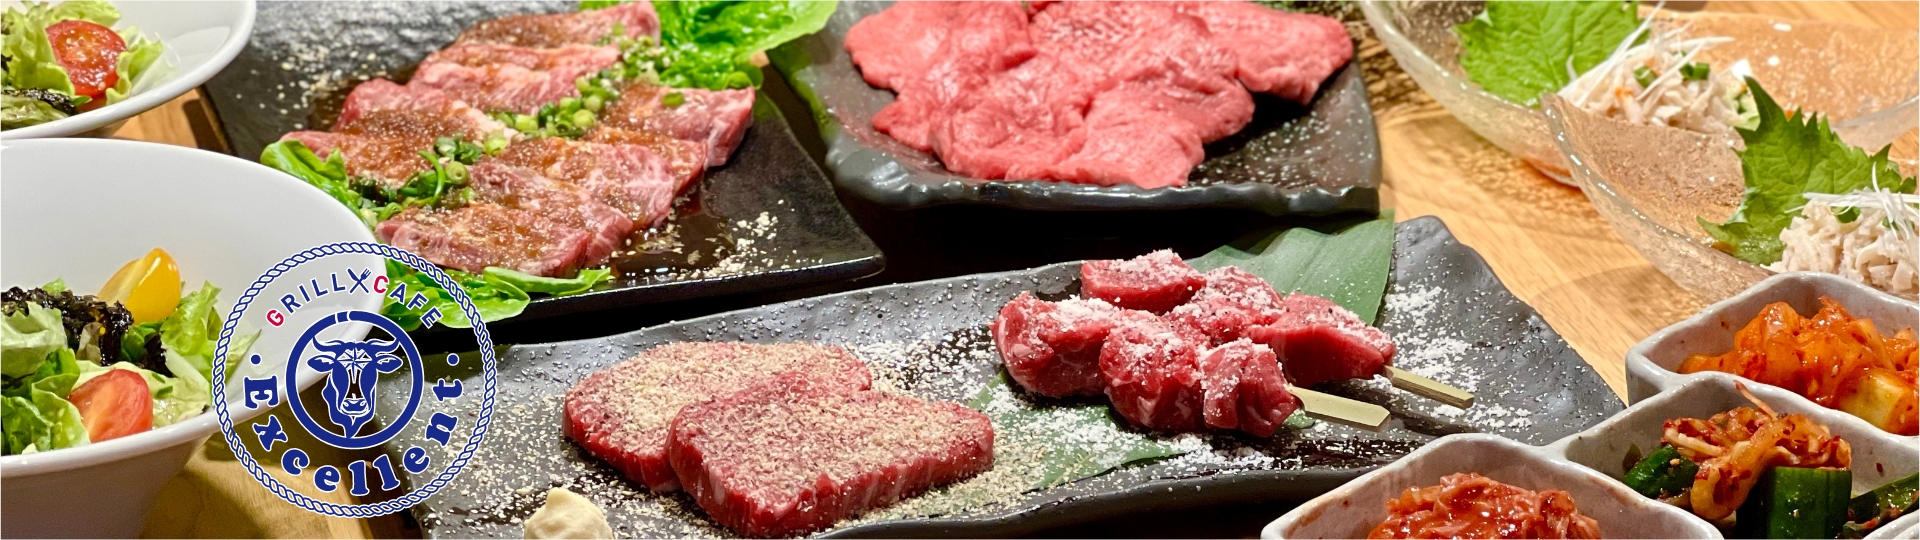 Grill Cafe Excellent 海を眺める焼肉